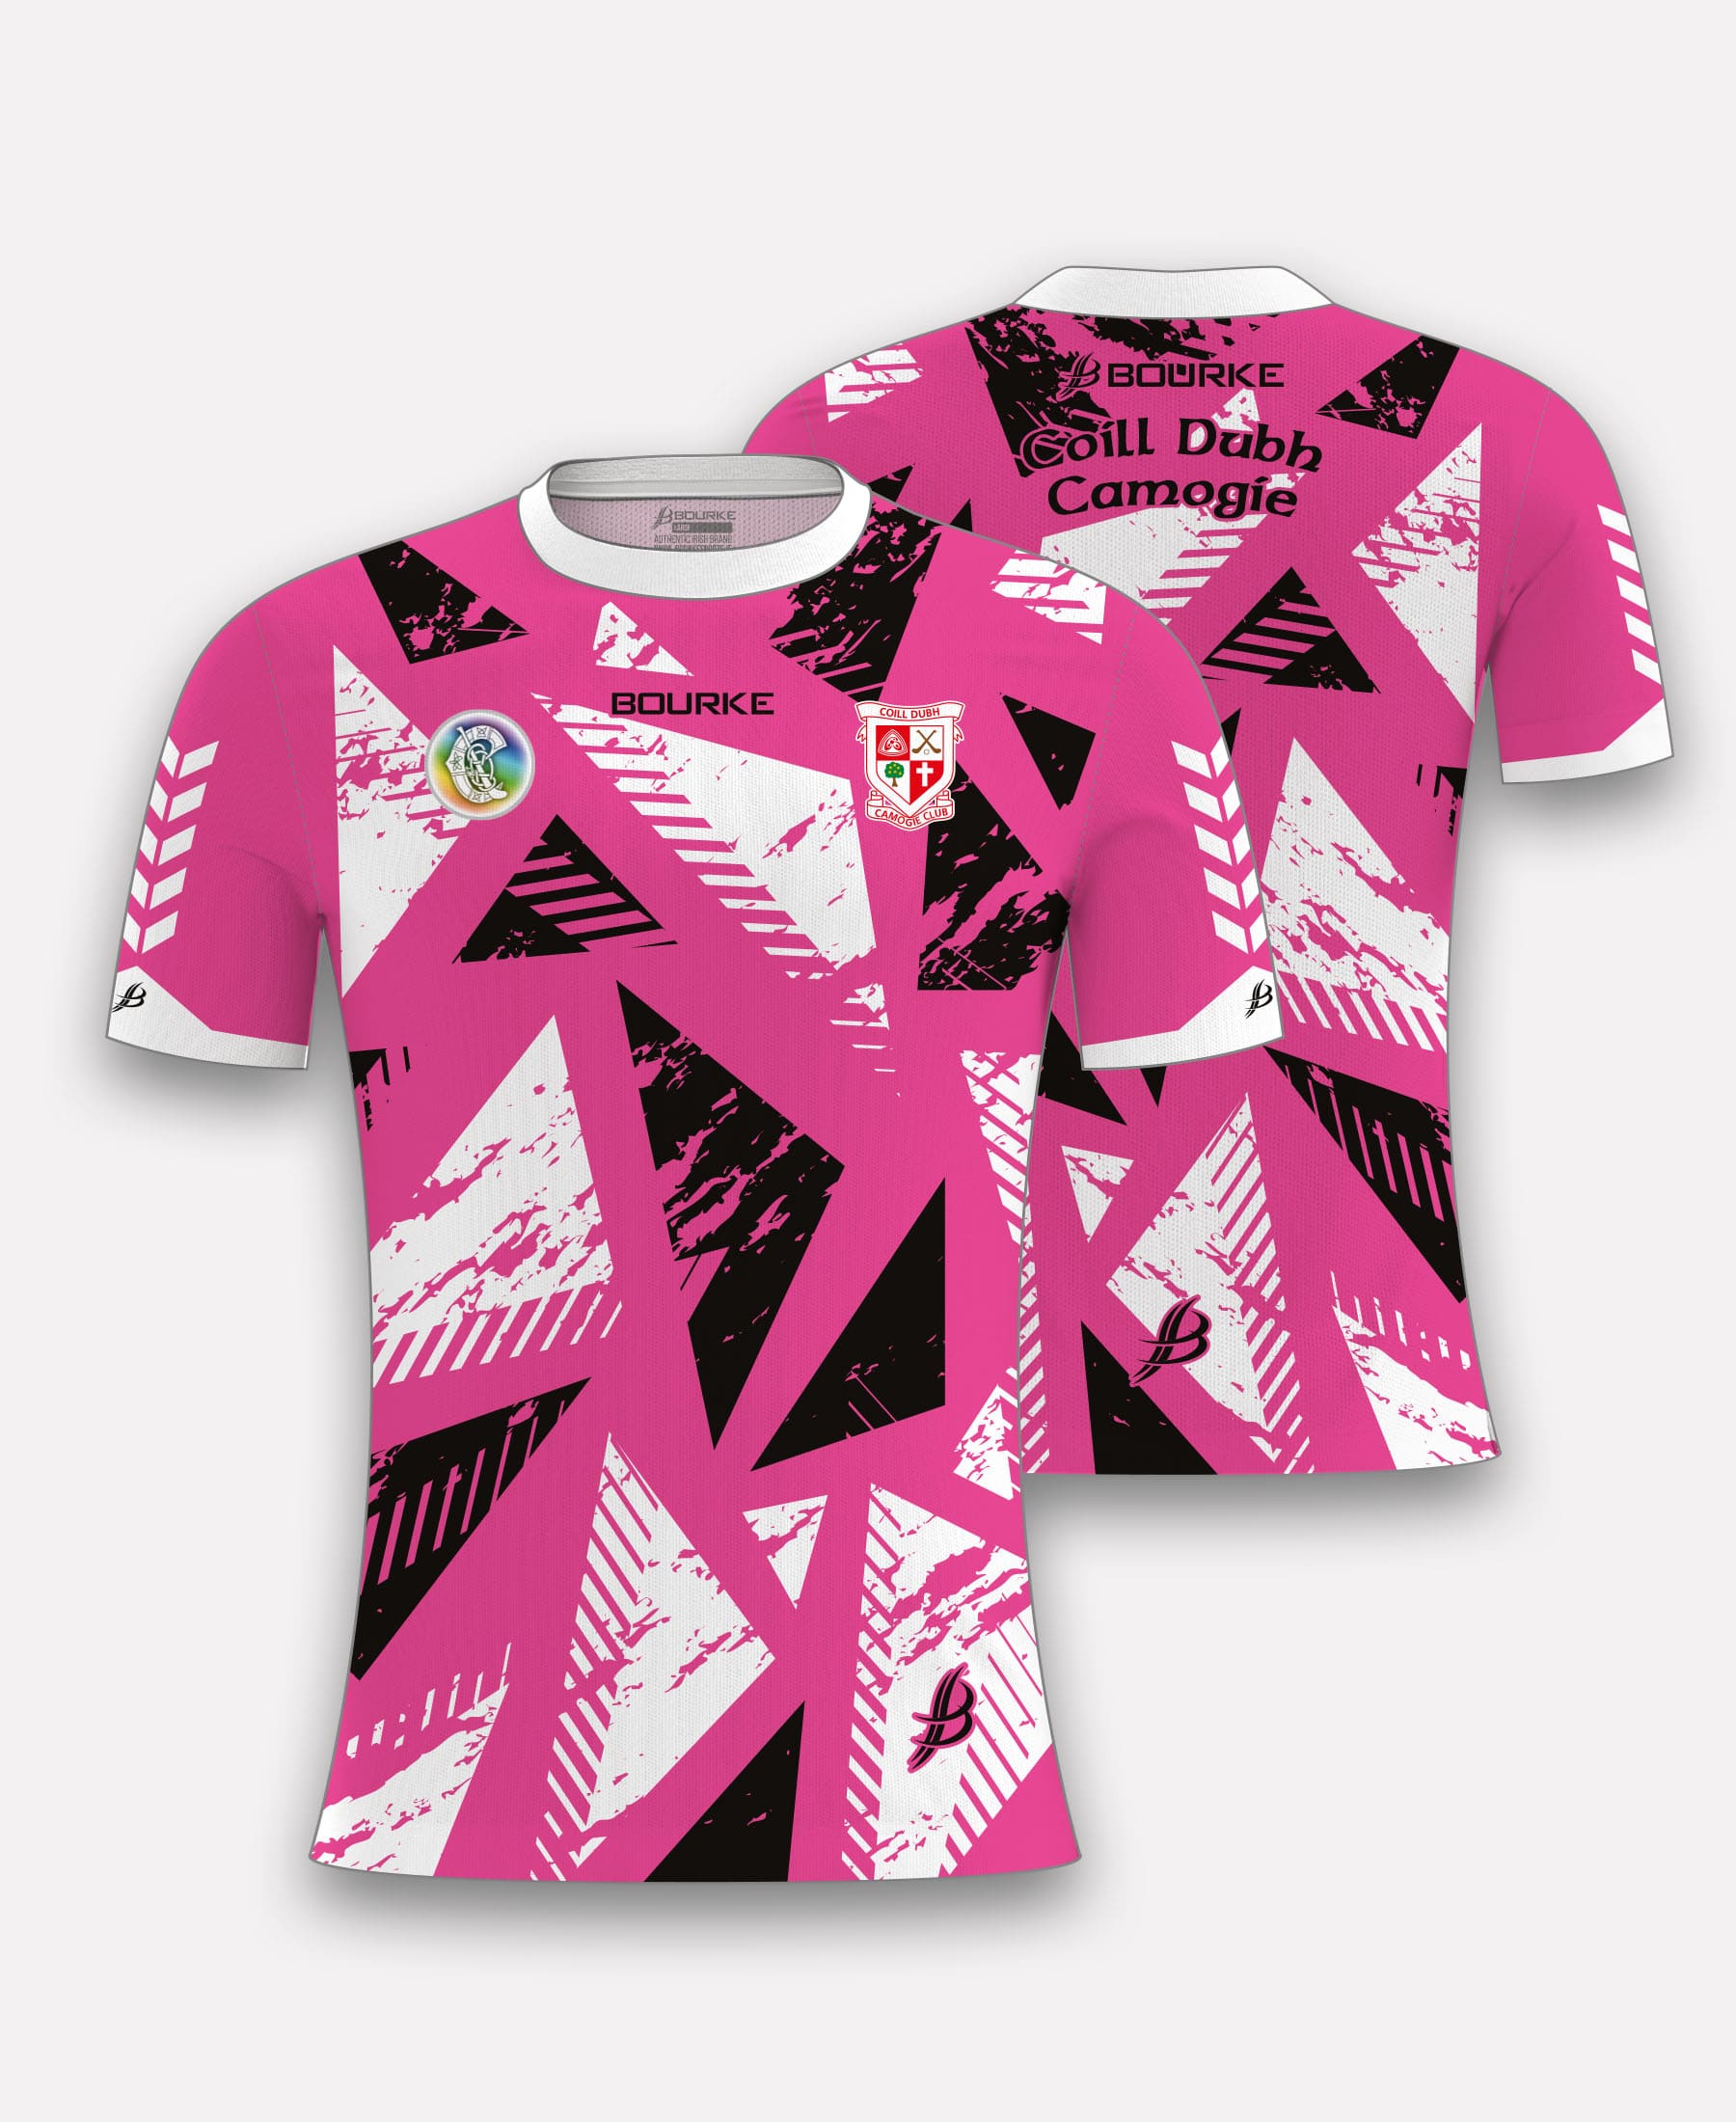 Coill Dubh Camogie Training Jersey (Black/Pink)